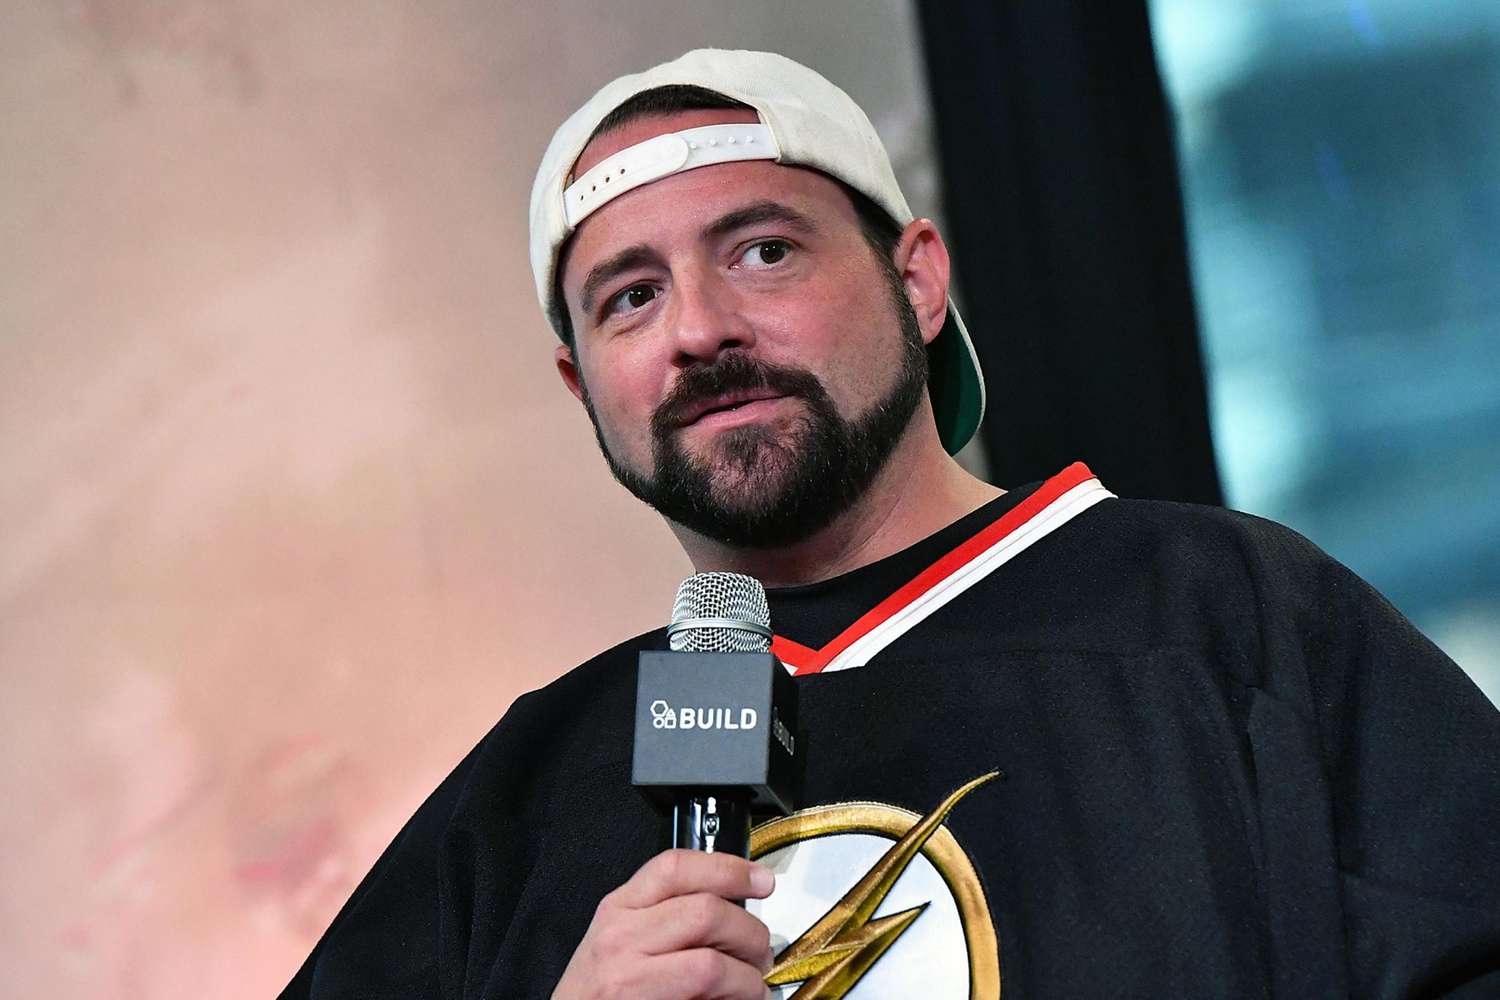 AOL Build Presents Kevin Smith and Harley Quinn Smith Discussing Their Film, "Yoga Hosers"